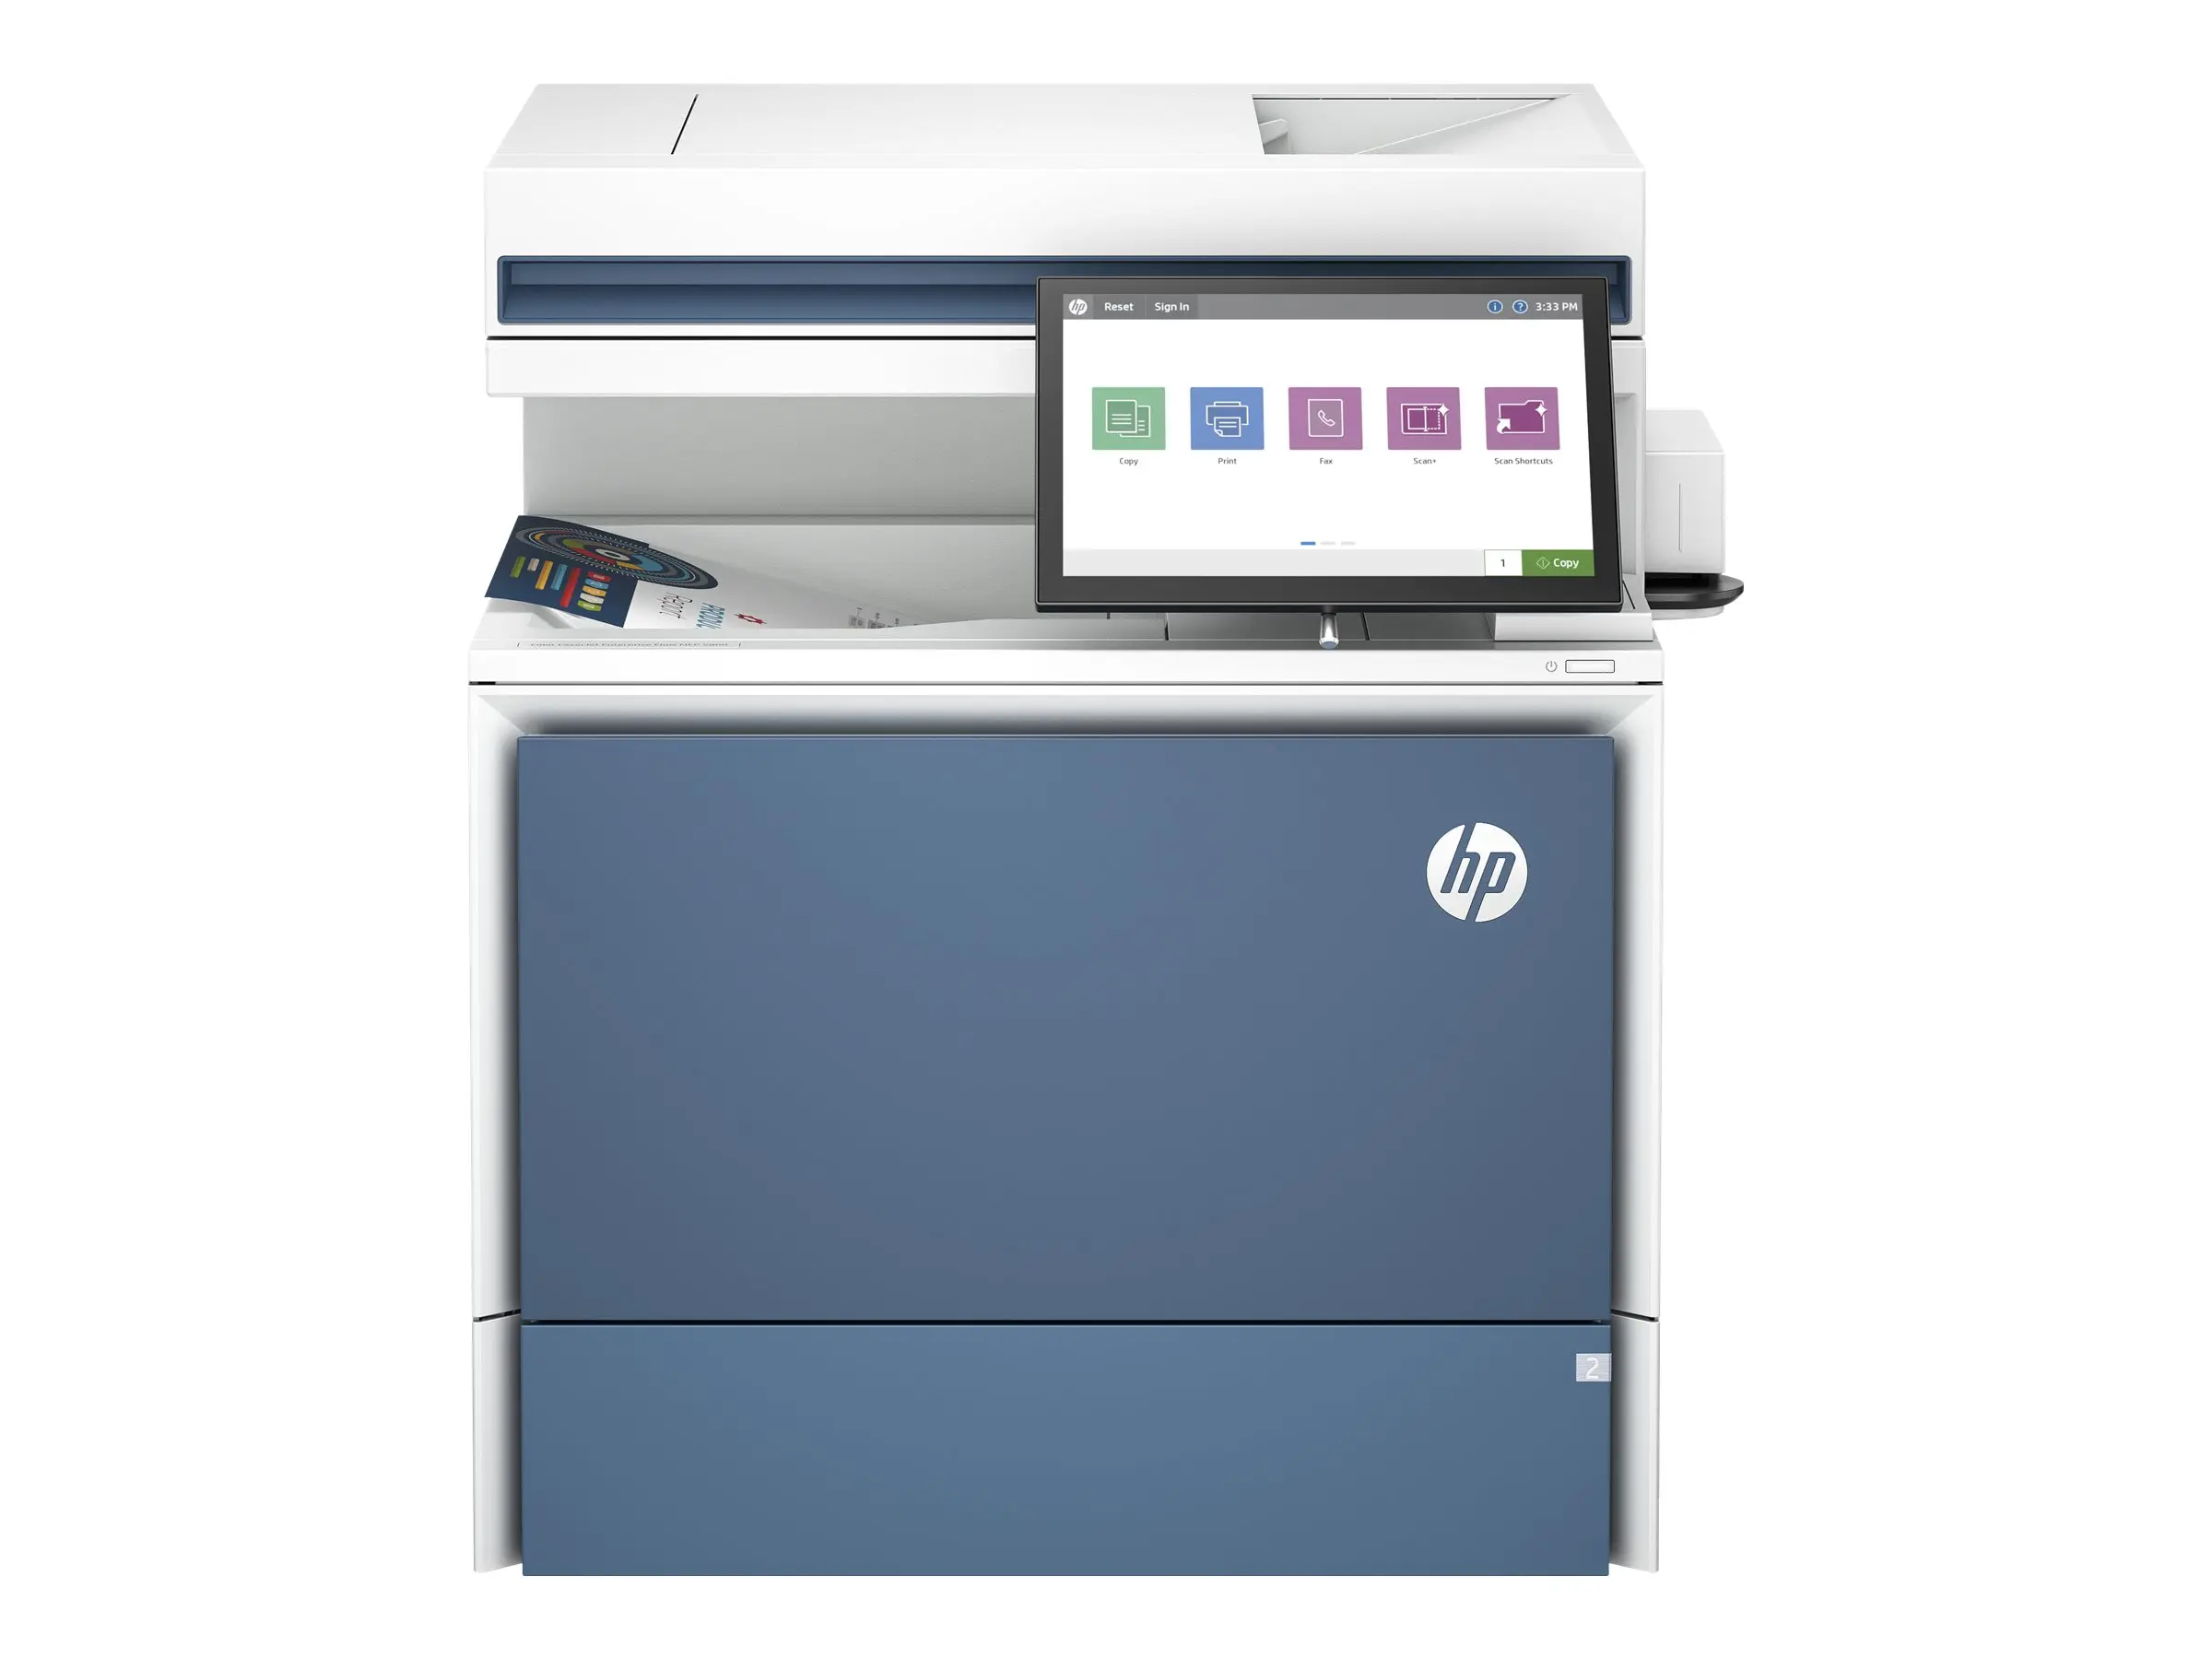 hp hewlett packard lj enterprise 600 envelope feeder specifications - What is the duty cycle of the HP m602